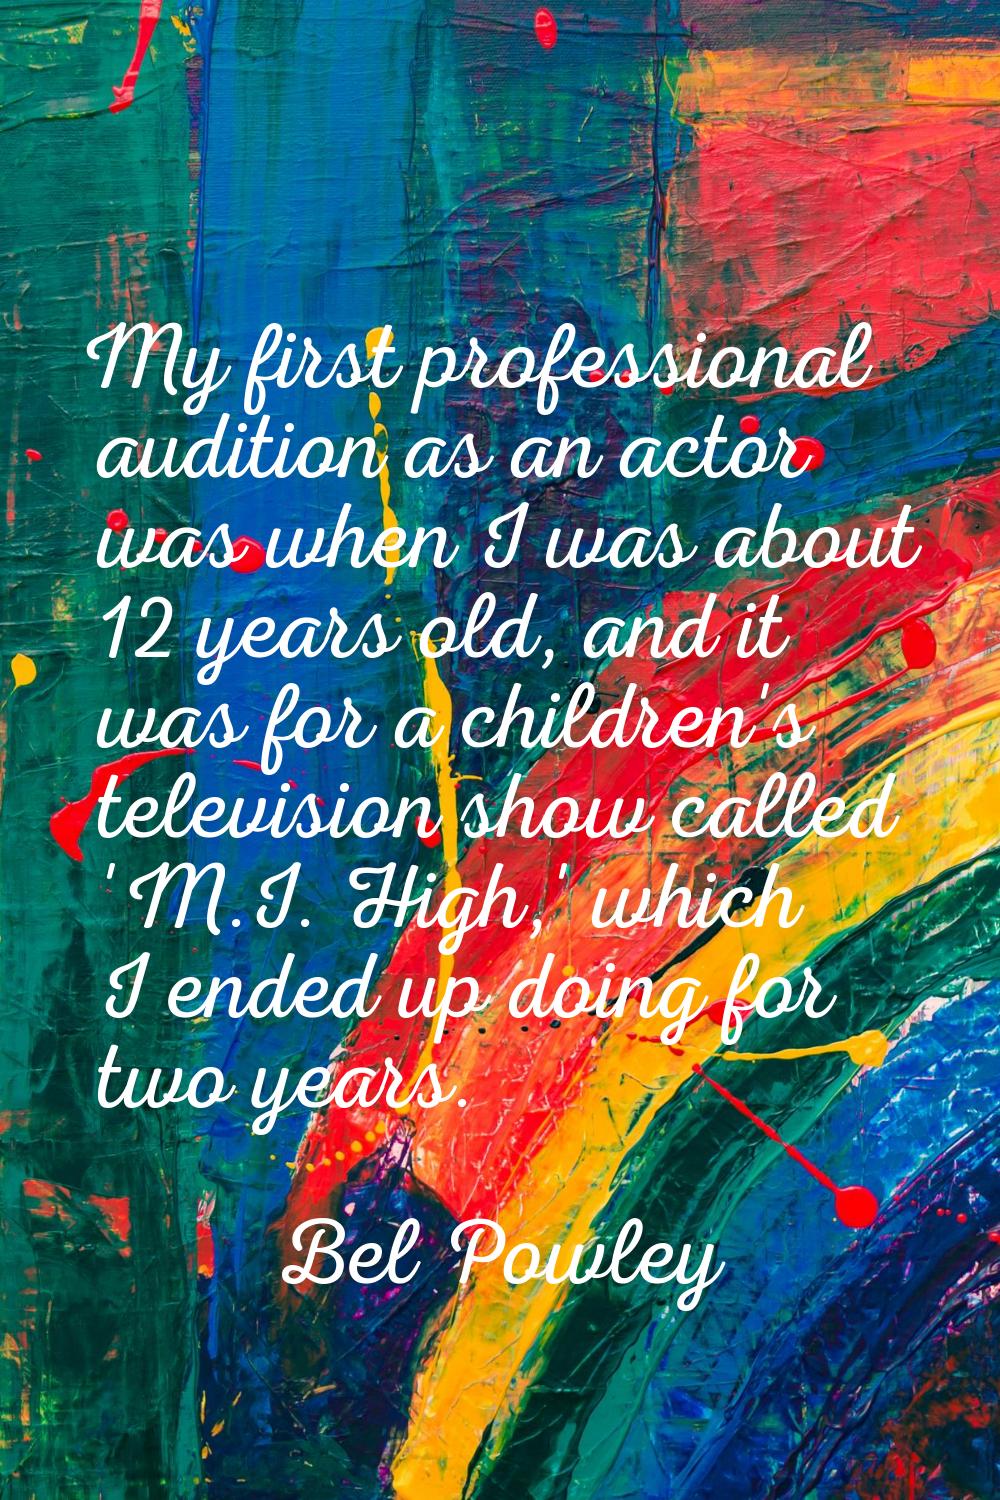 My first professional audition as an actor was when I was about 12 years old, and it was for a chil